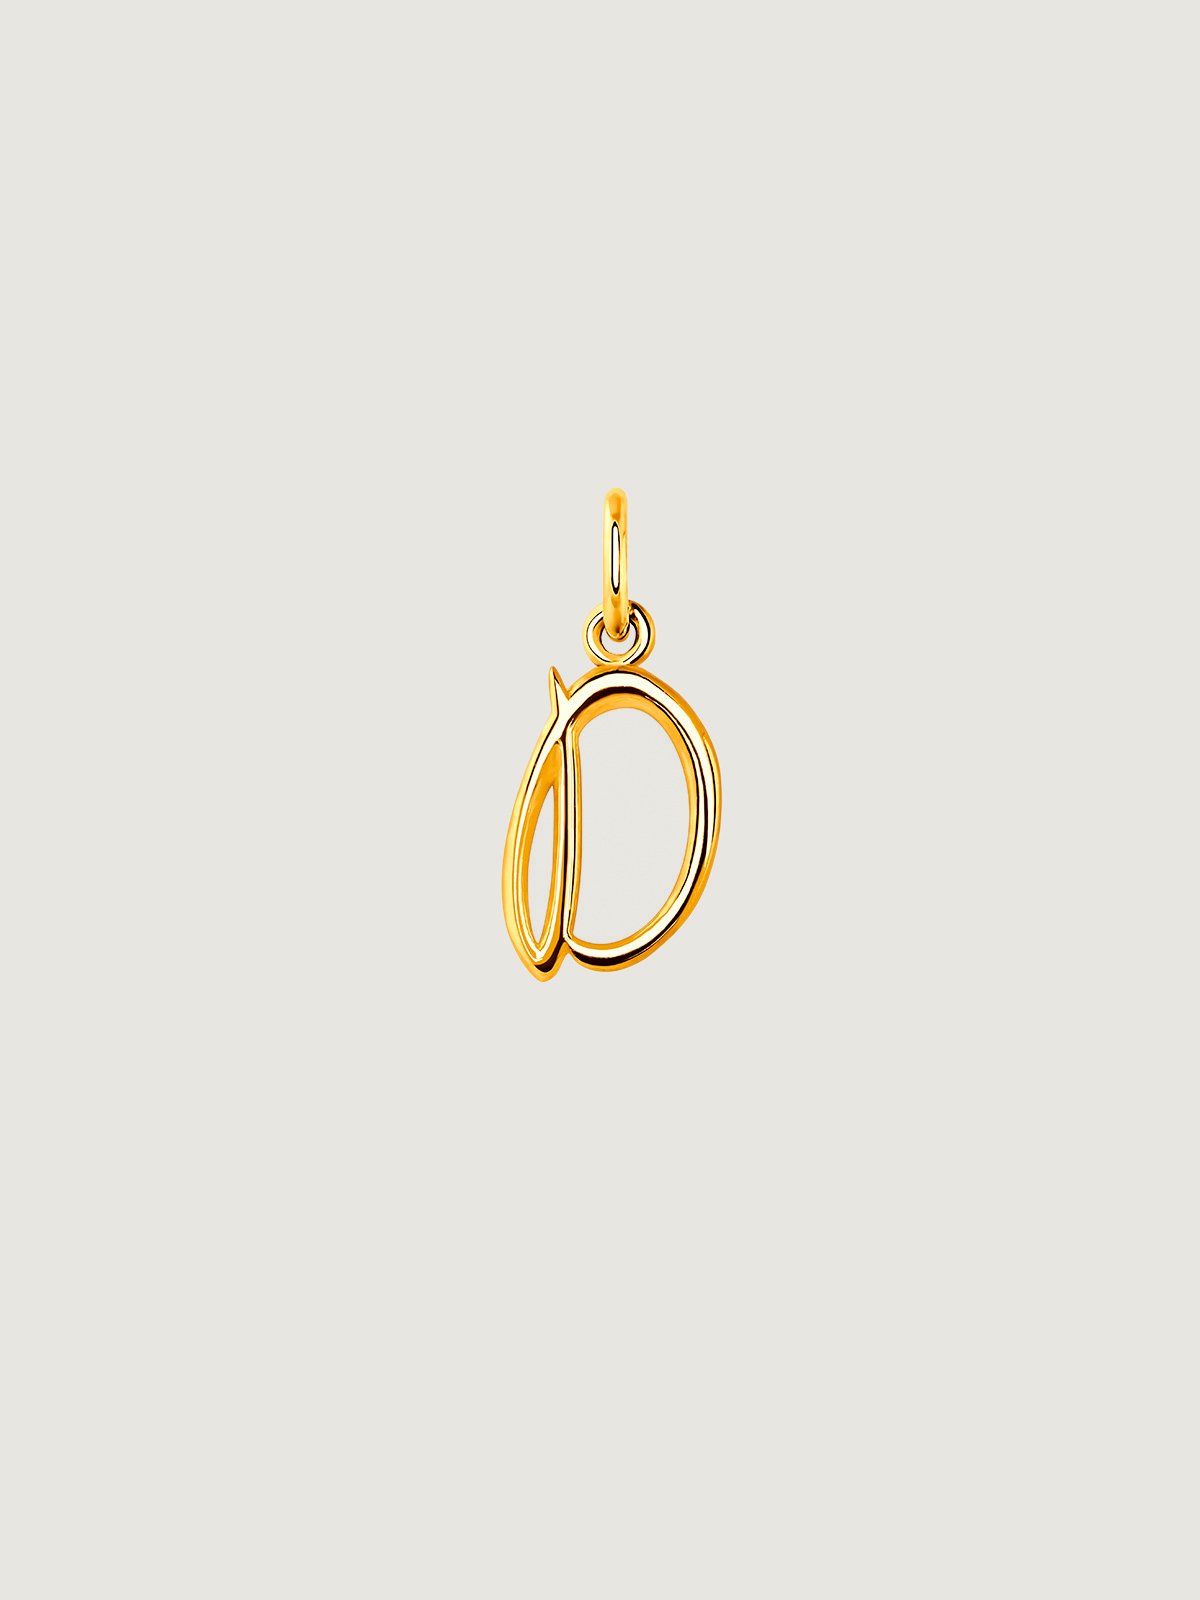 925 Silver charm dipped in 18K yellow gold with initial D.